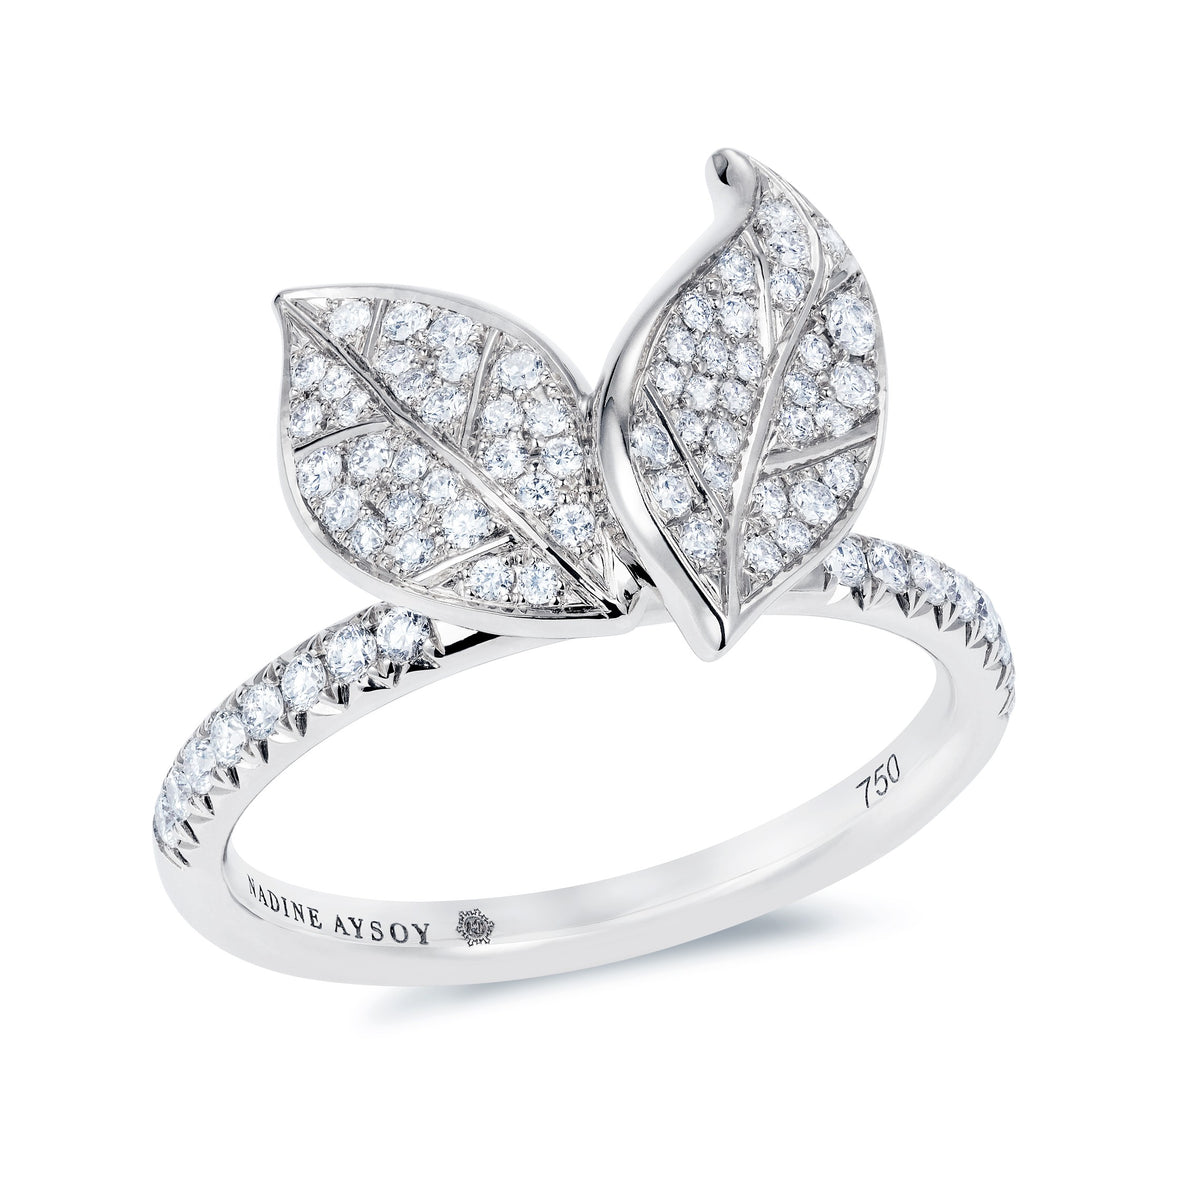 Petite Feuille White Ring